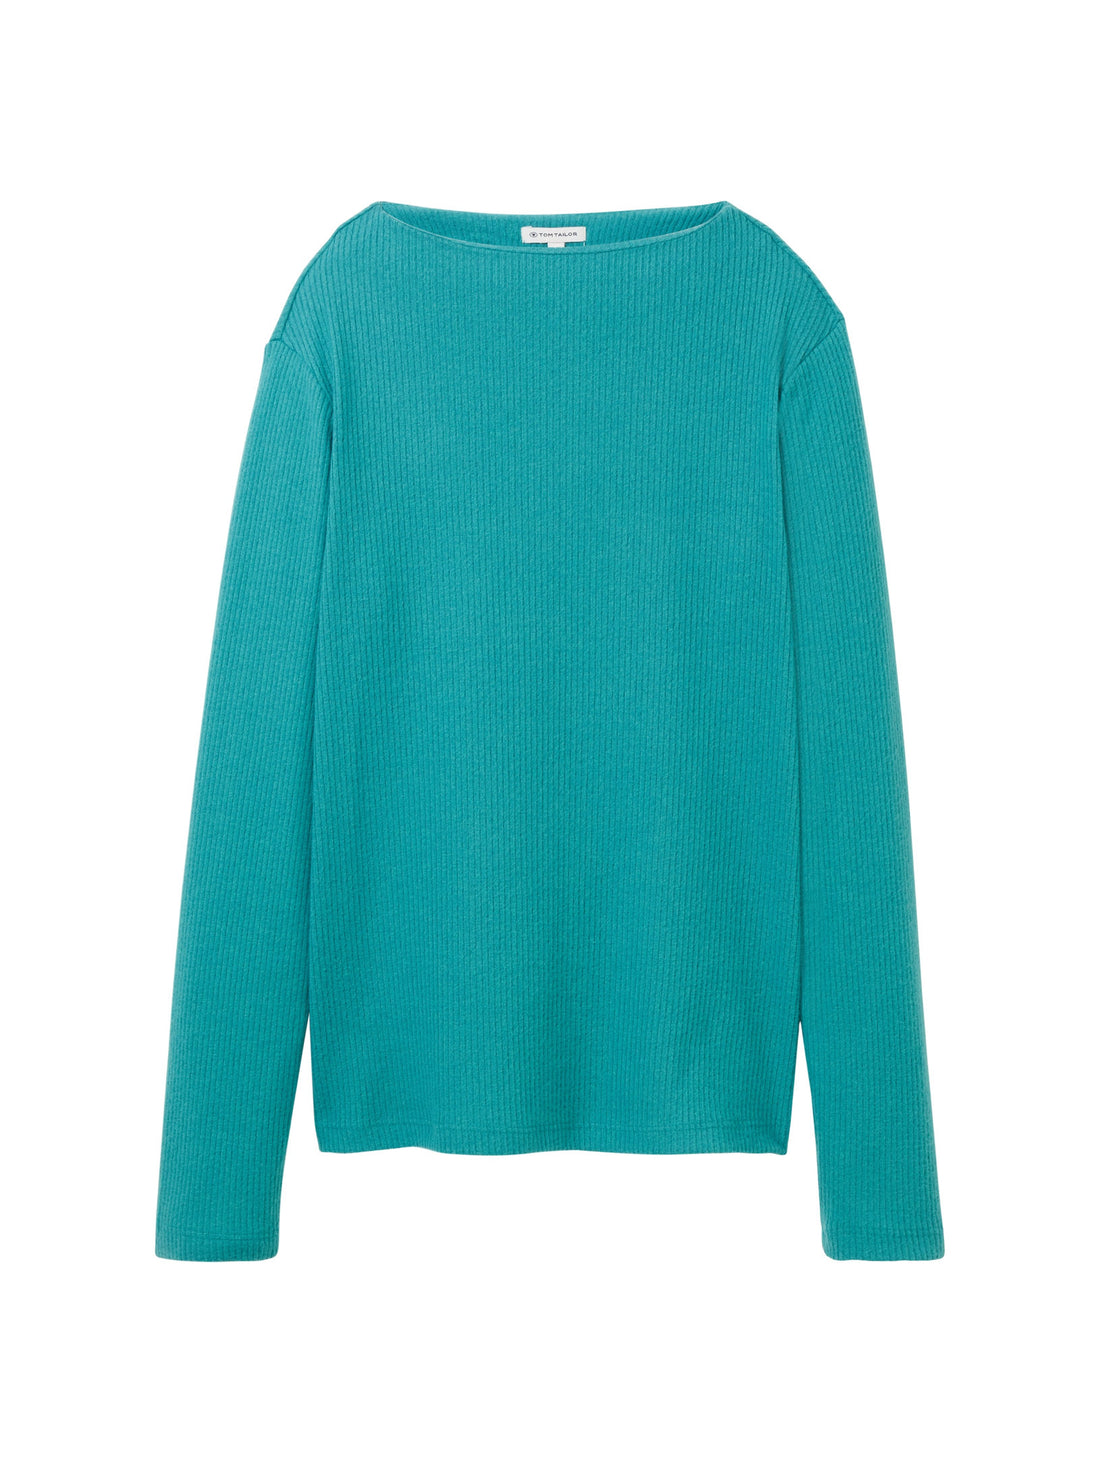 Long Sleeve T Shirt With Round Neckline_1038165_21178_01